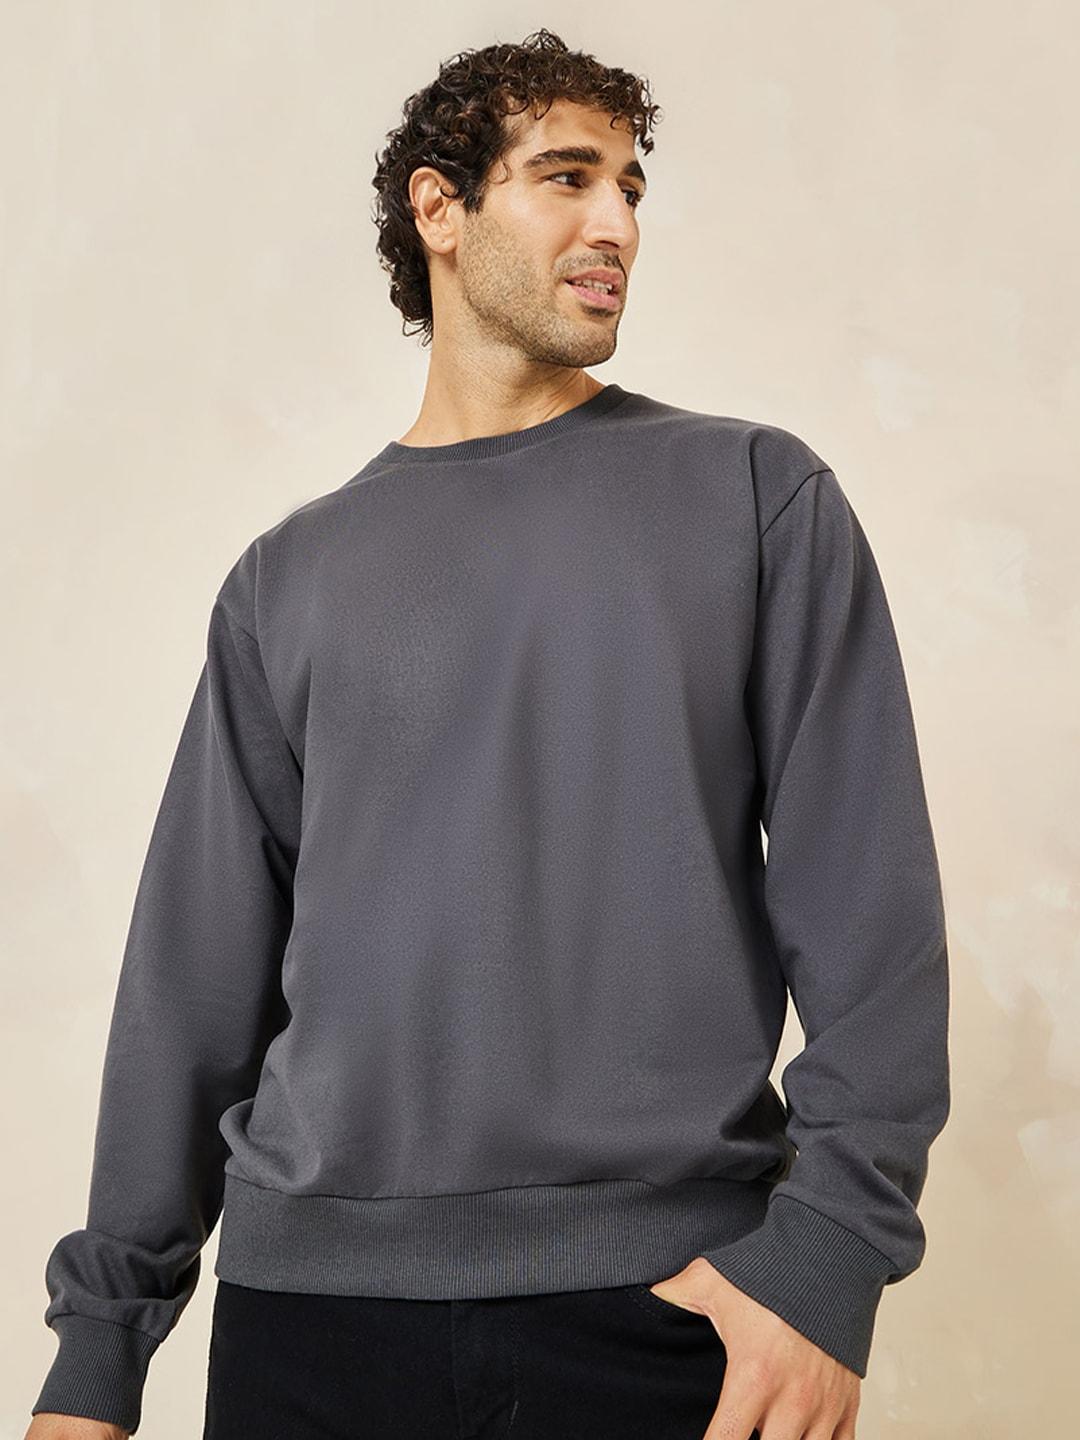 styli relaxed fit cotton terry sweatshirt